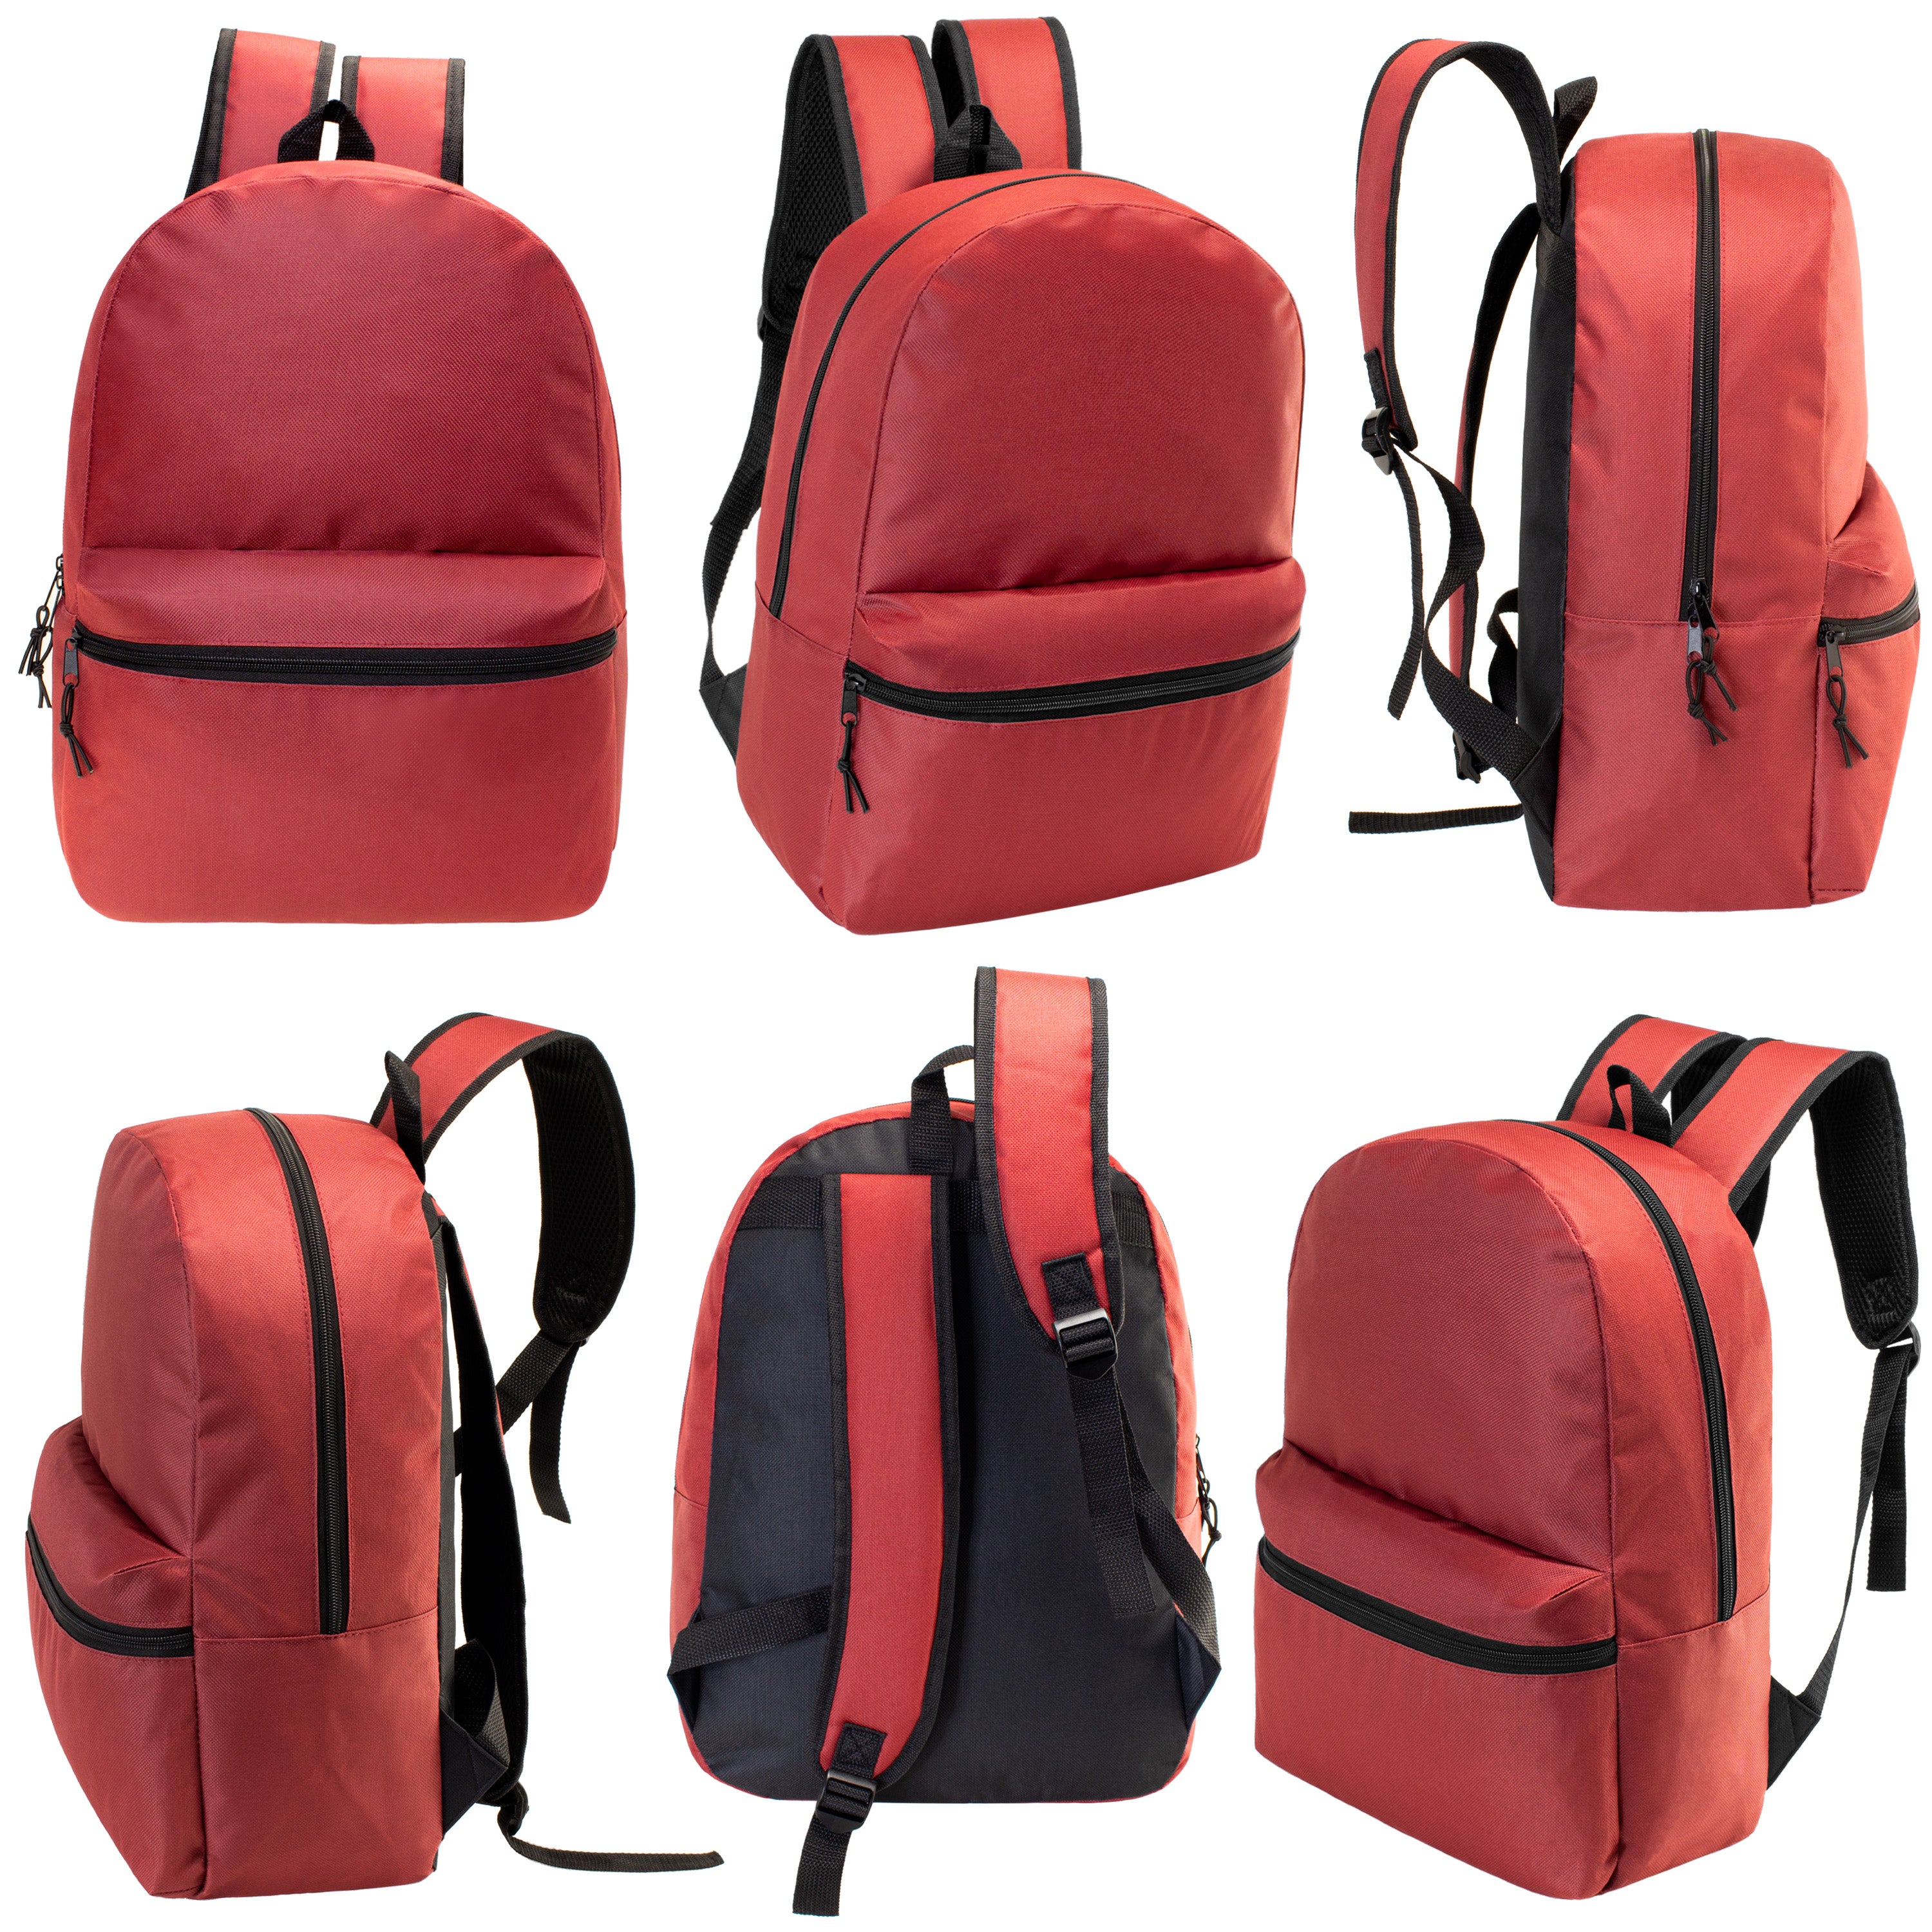 bulk backpacks under $5 with free shipping